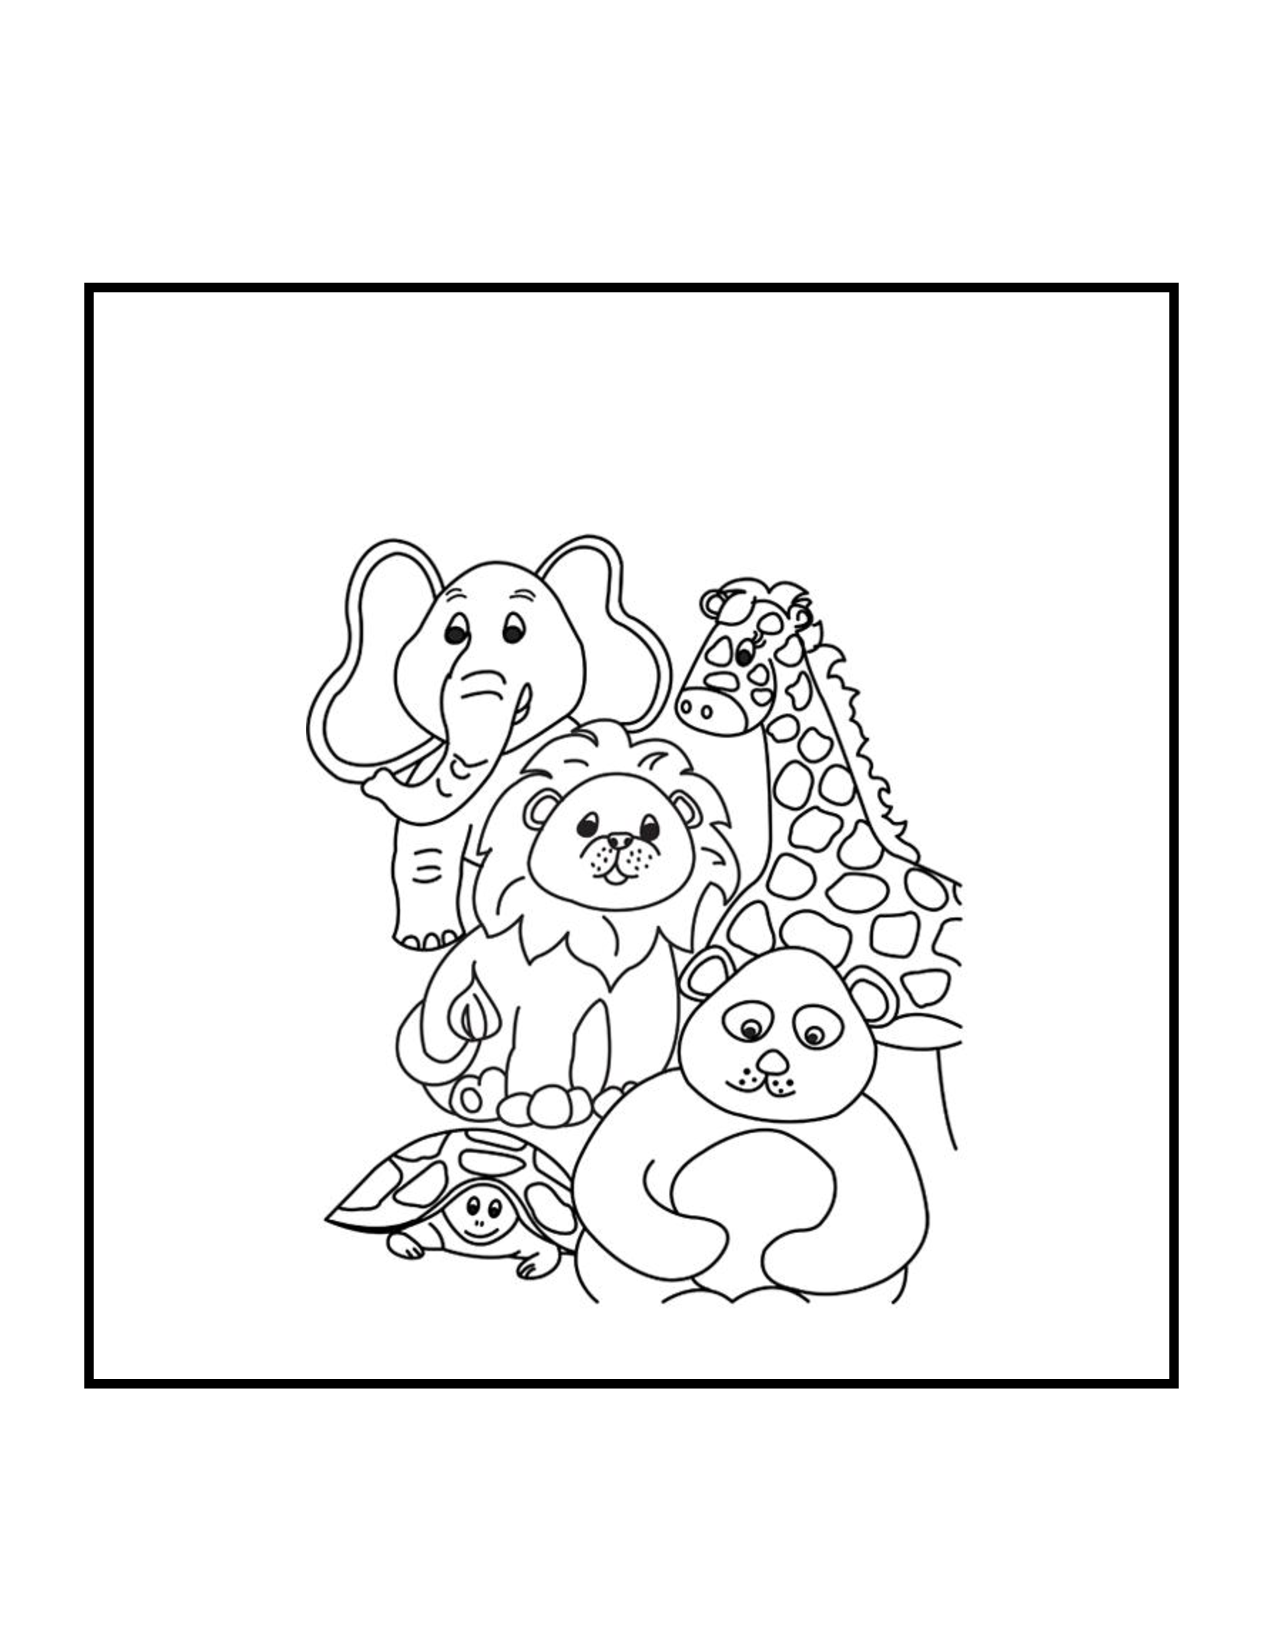 lovely zoo animals coloring page free printable coloring pages for kids